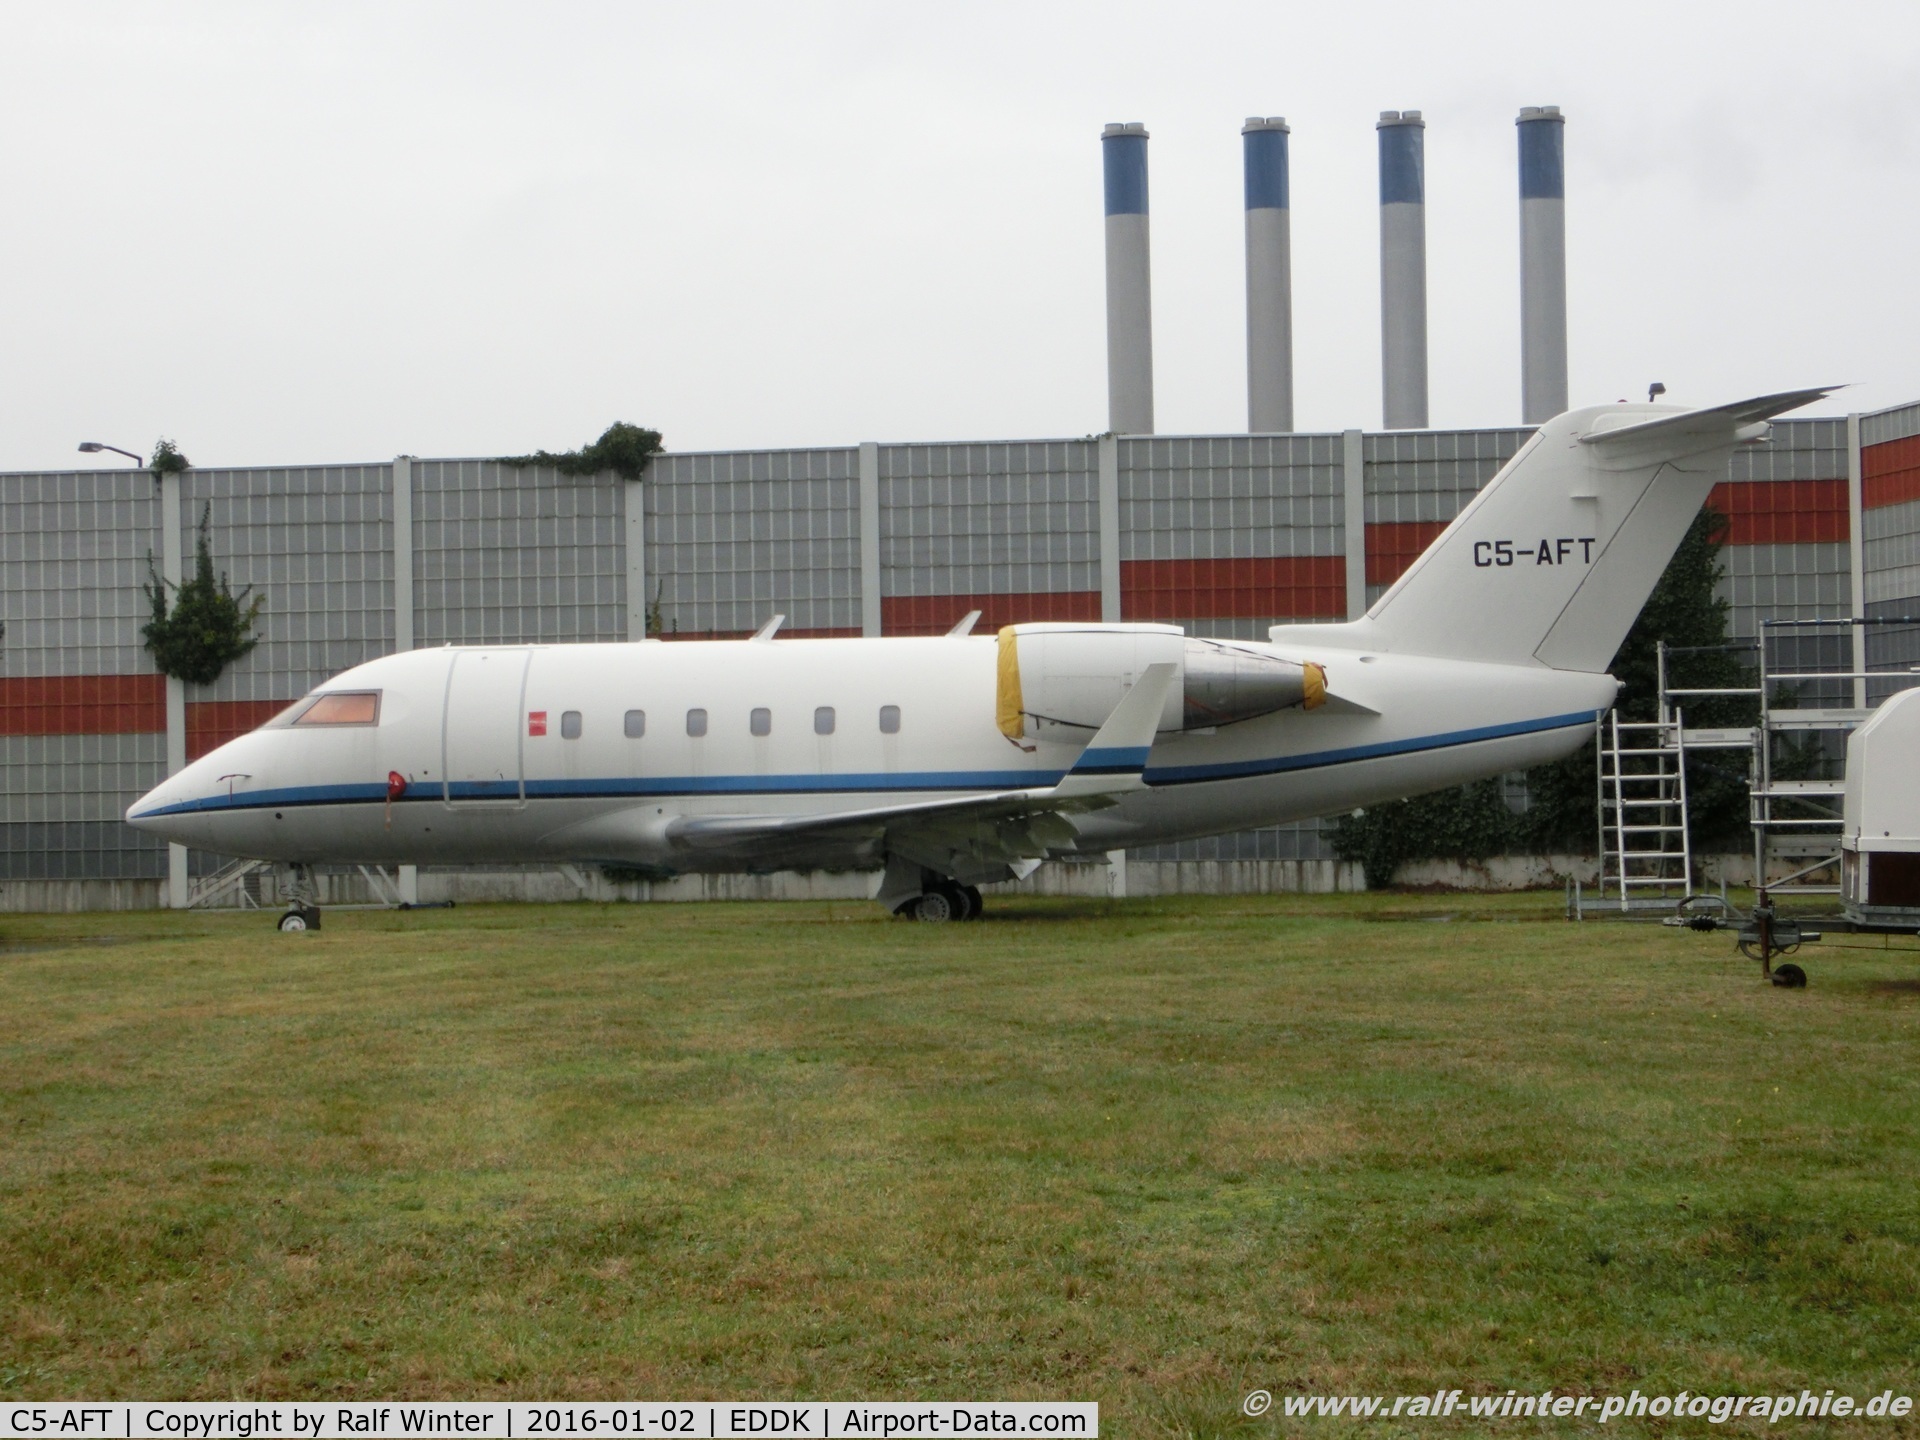 C5-AFT, 1986 Canadair Challenger 601 (CL-600-2A12) C/N 3043, Canadair CL-600-2A12 Challenger 601 - Gambia Government - 3043 - C5-AFT - 02.01.2016 - CGN